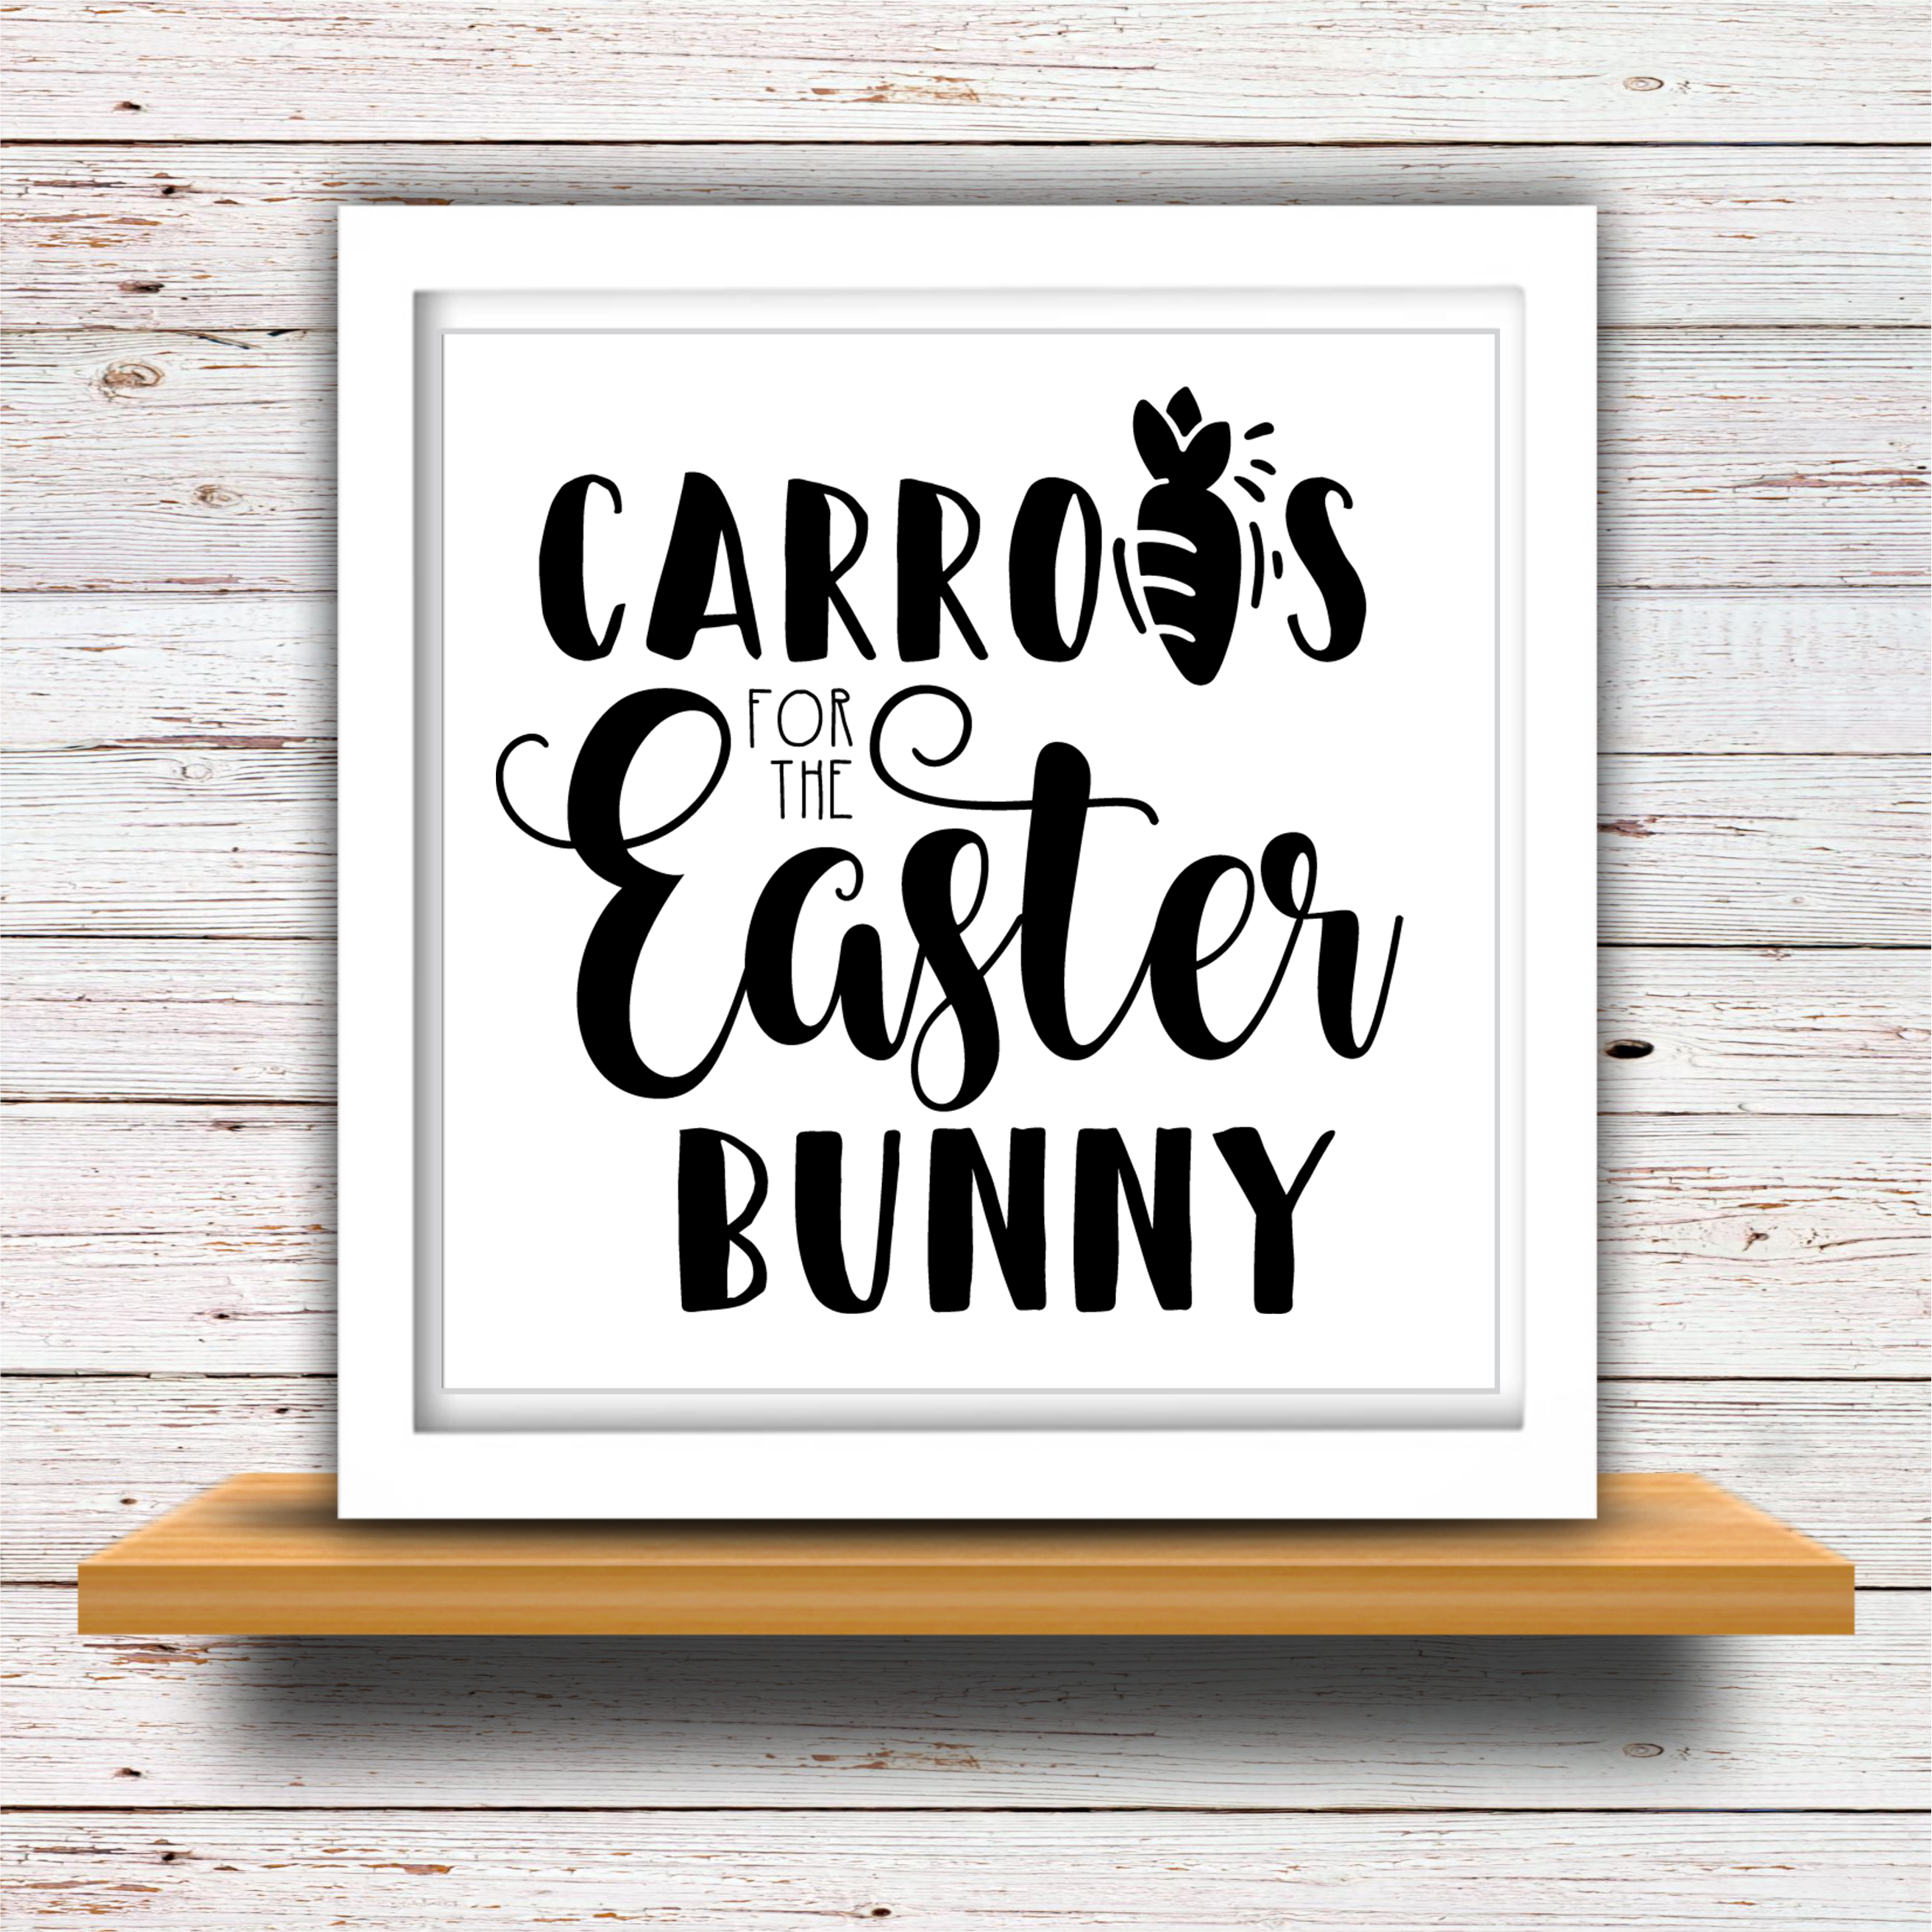 Download Carrots for the Easter Bunny | Easter Svg Files | High Quality Svg Eps Dxf Png Files | Cricut ...